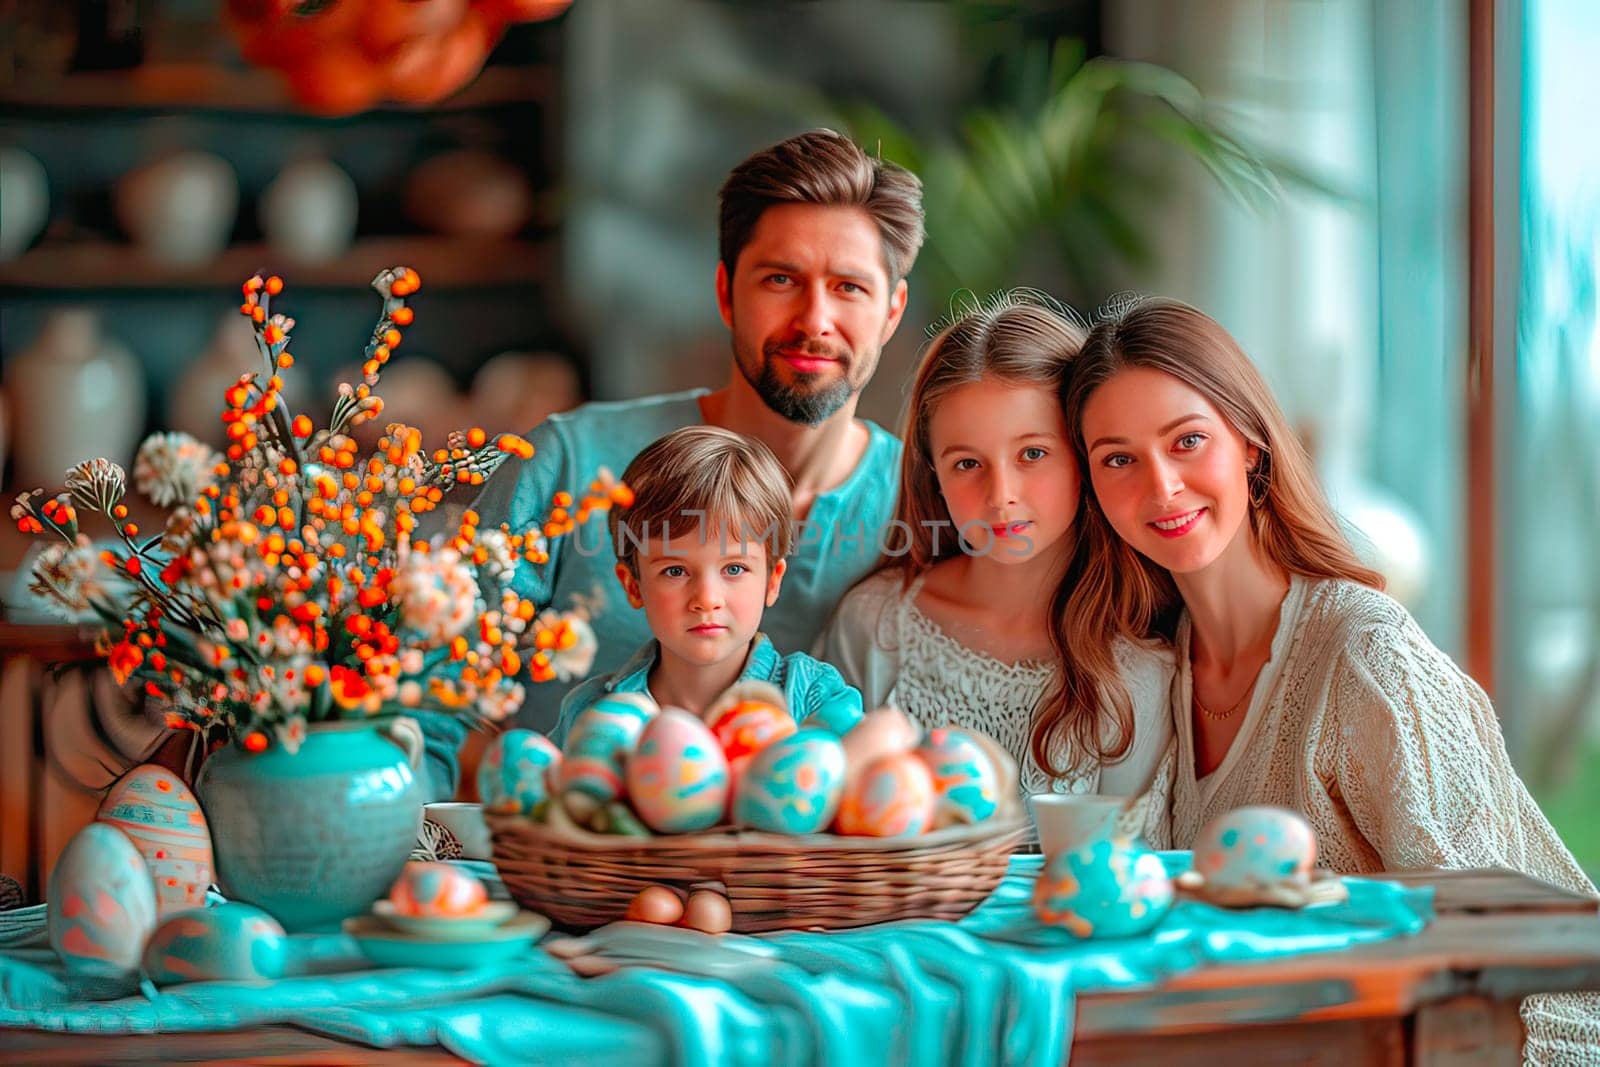 A family of four sits around a table full of Easter eggs. On the table are flowers in a vase and lots of colourful eggs in a basket.